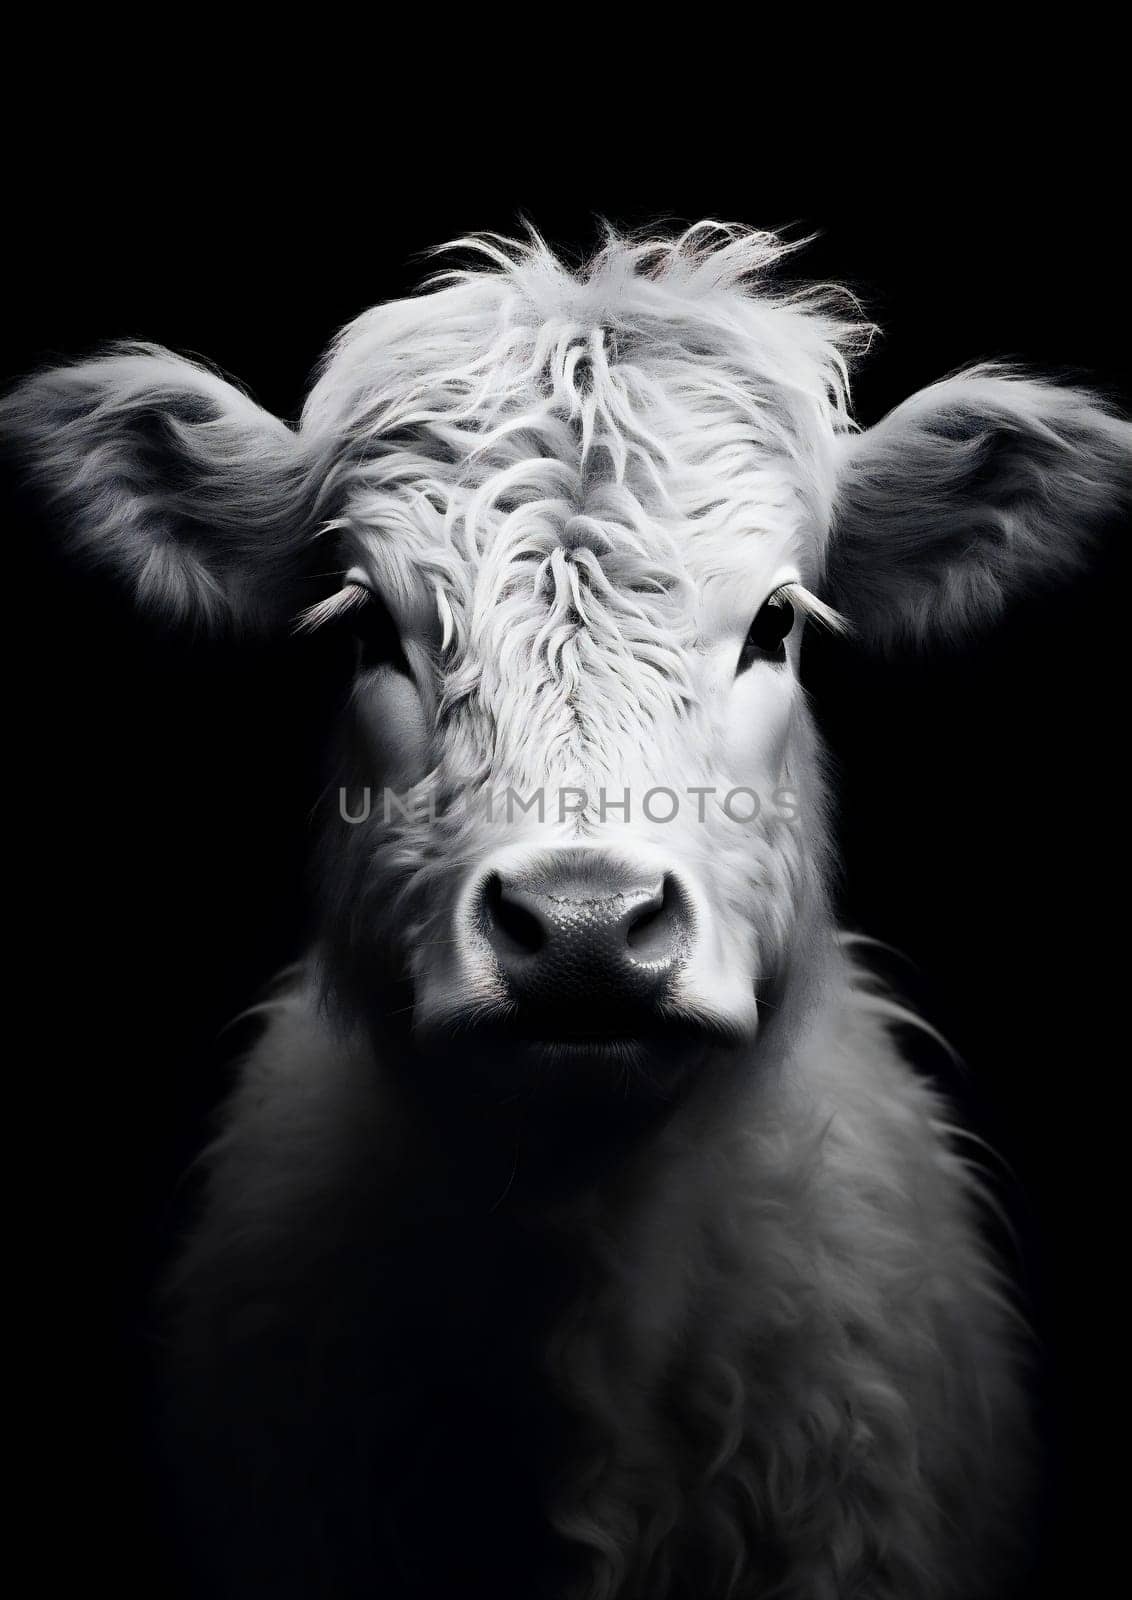 Black mammal brown livestock isolated bull rural white agriculture nature meat calf animal head portrait face farming cattle grass beef field cow